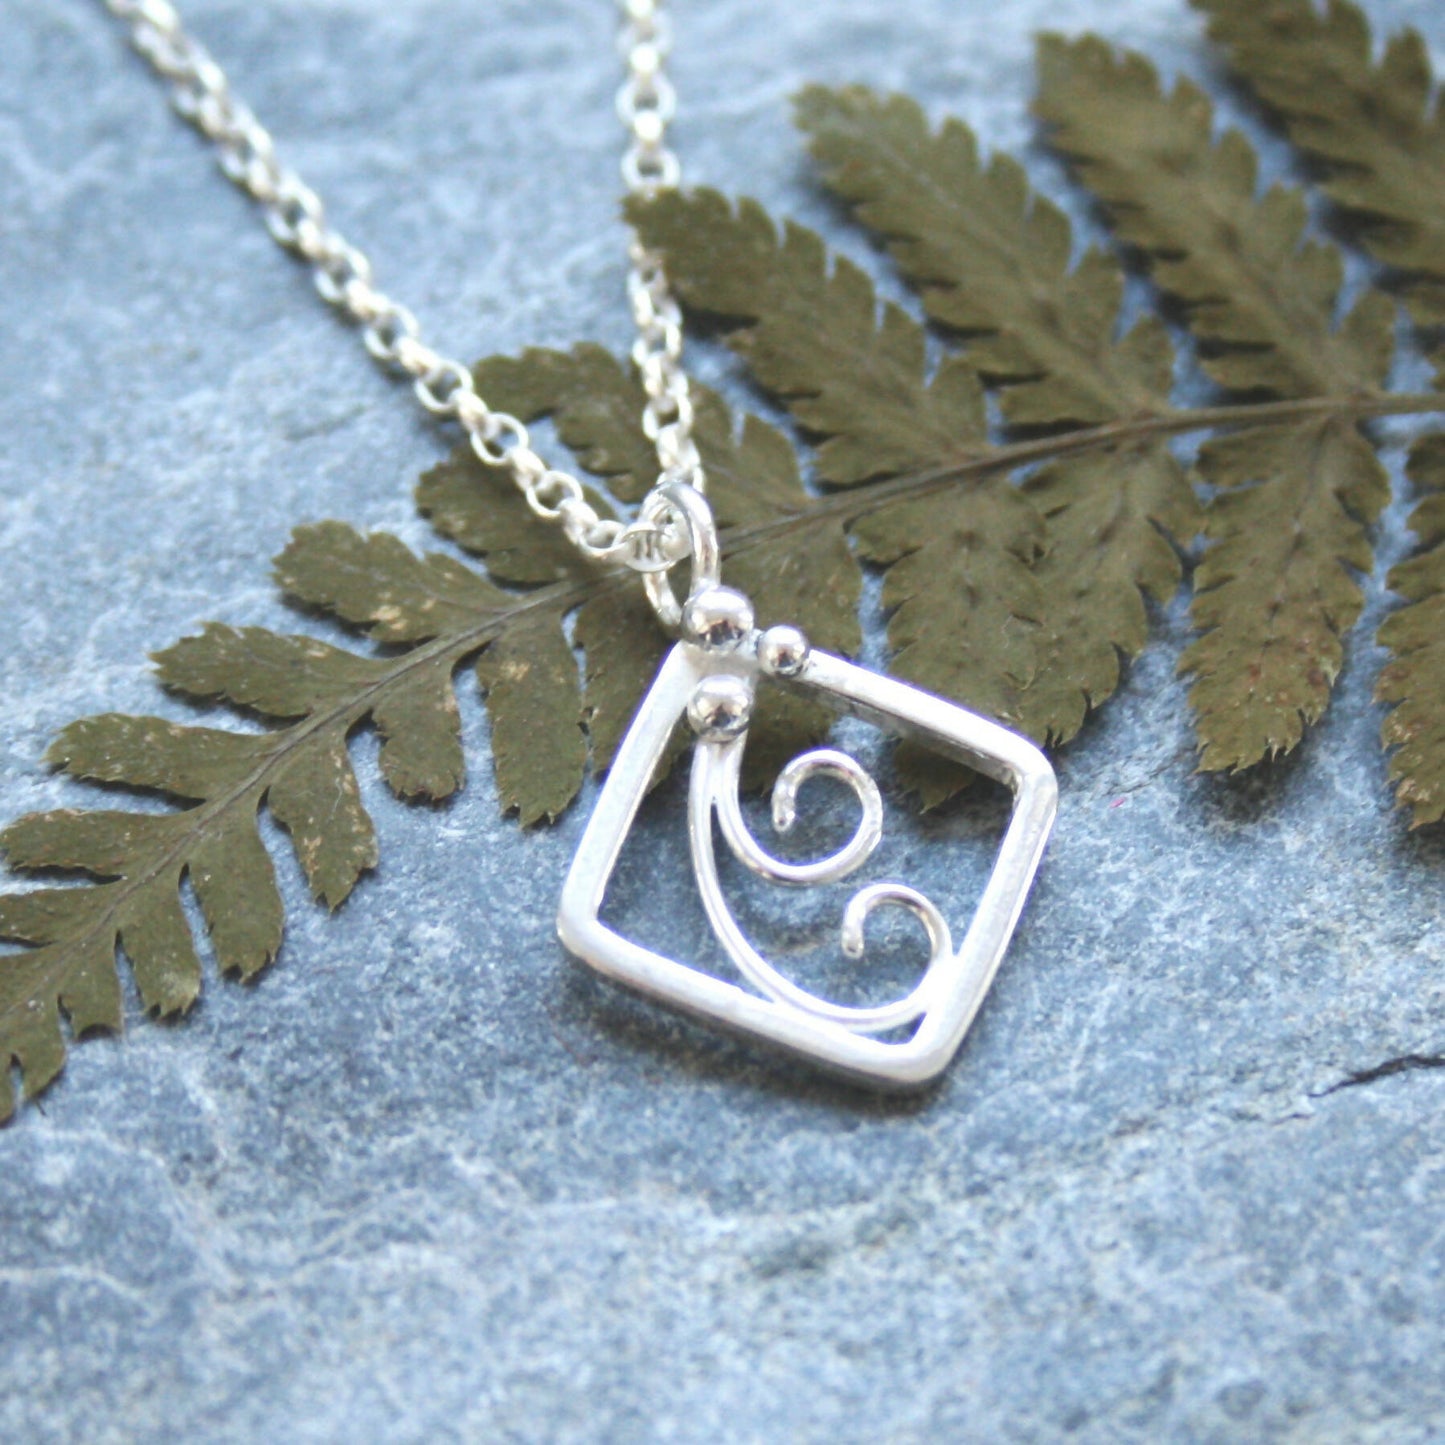 Fern inspired necklace